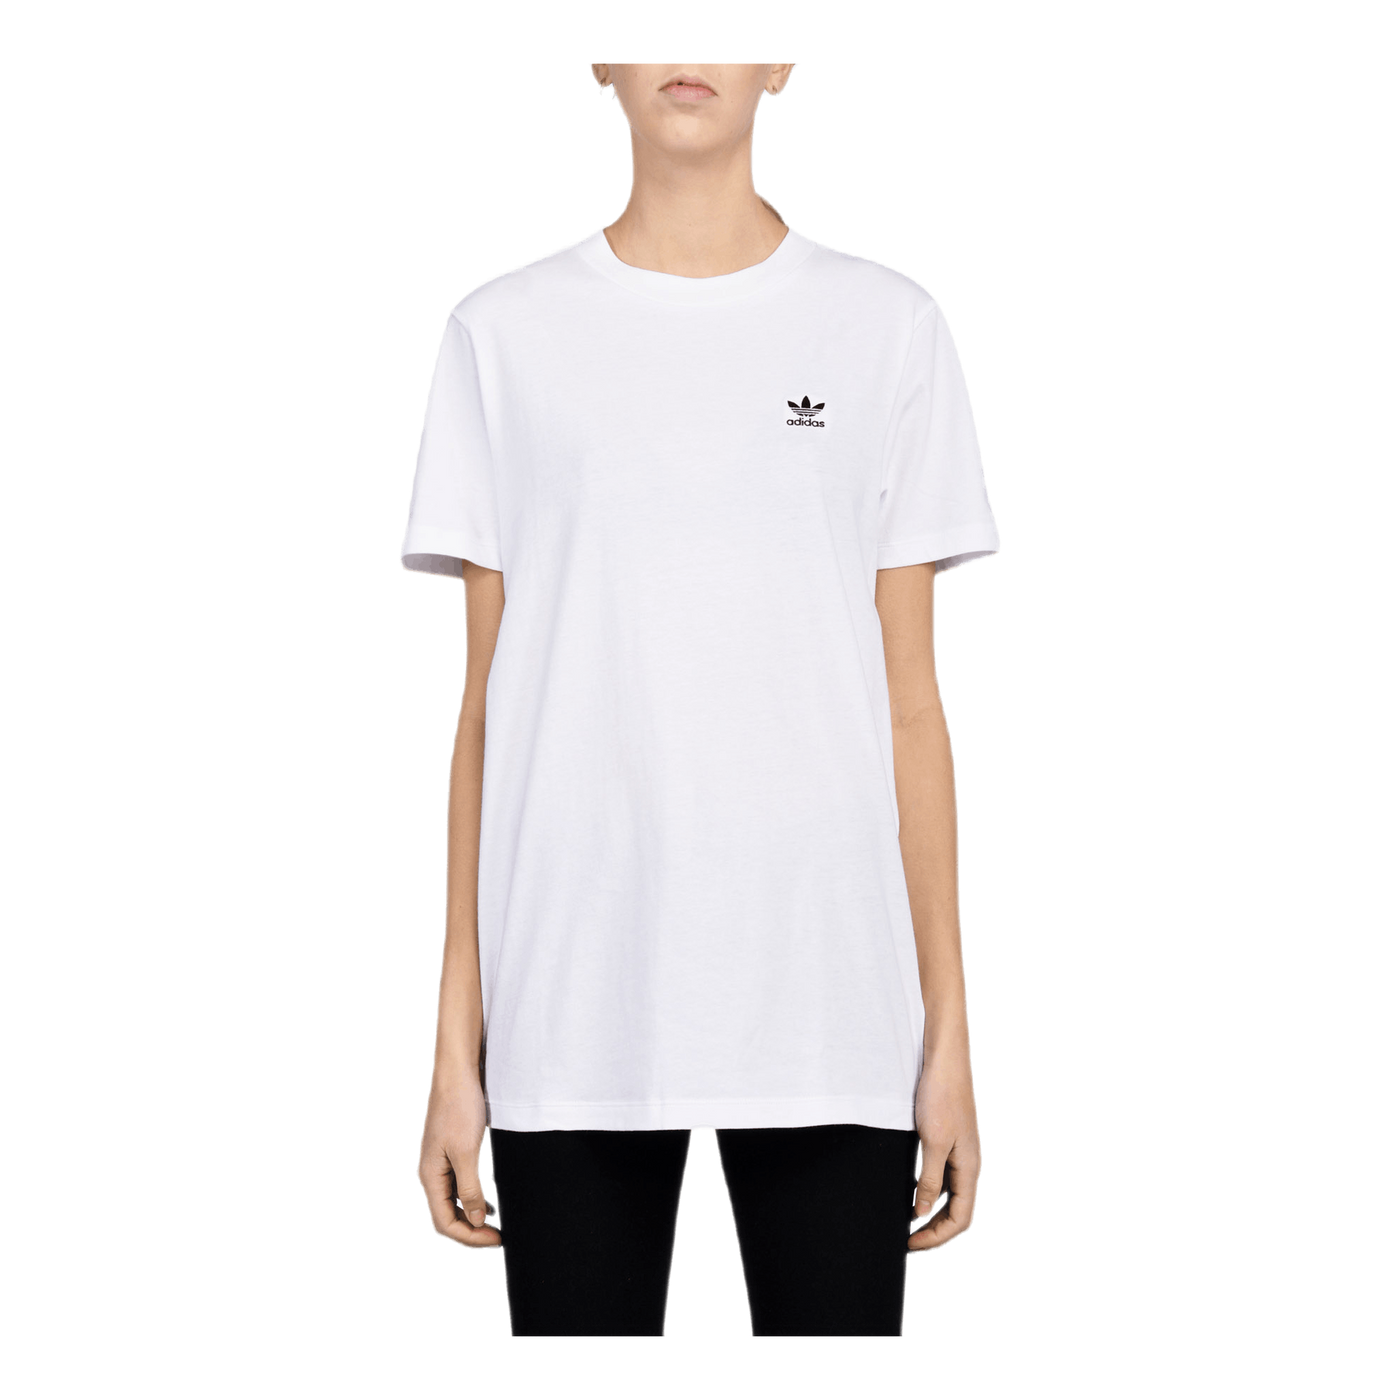 Styling Complements Tee White